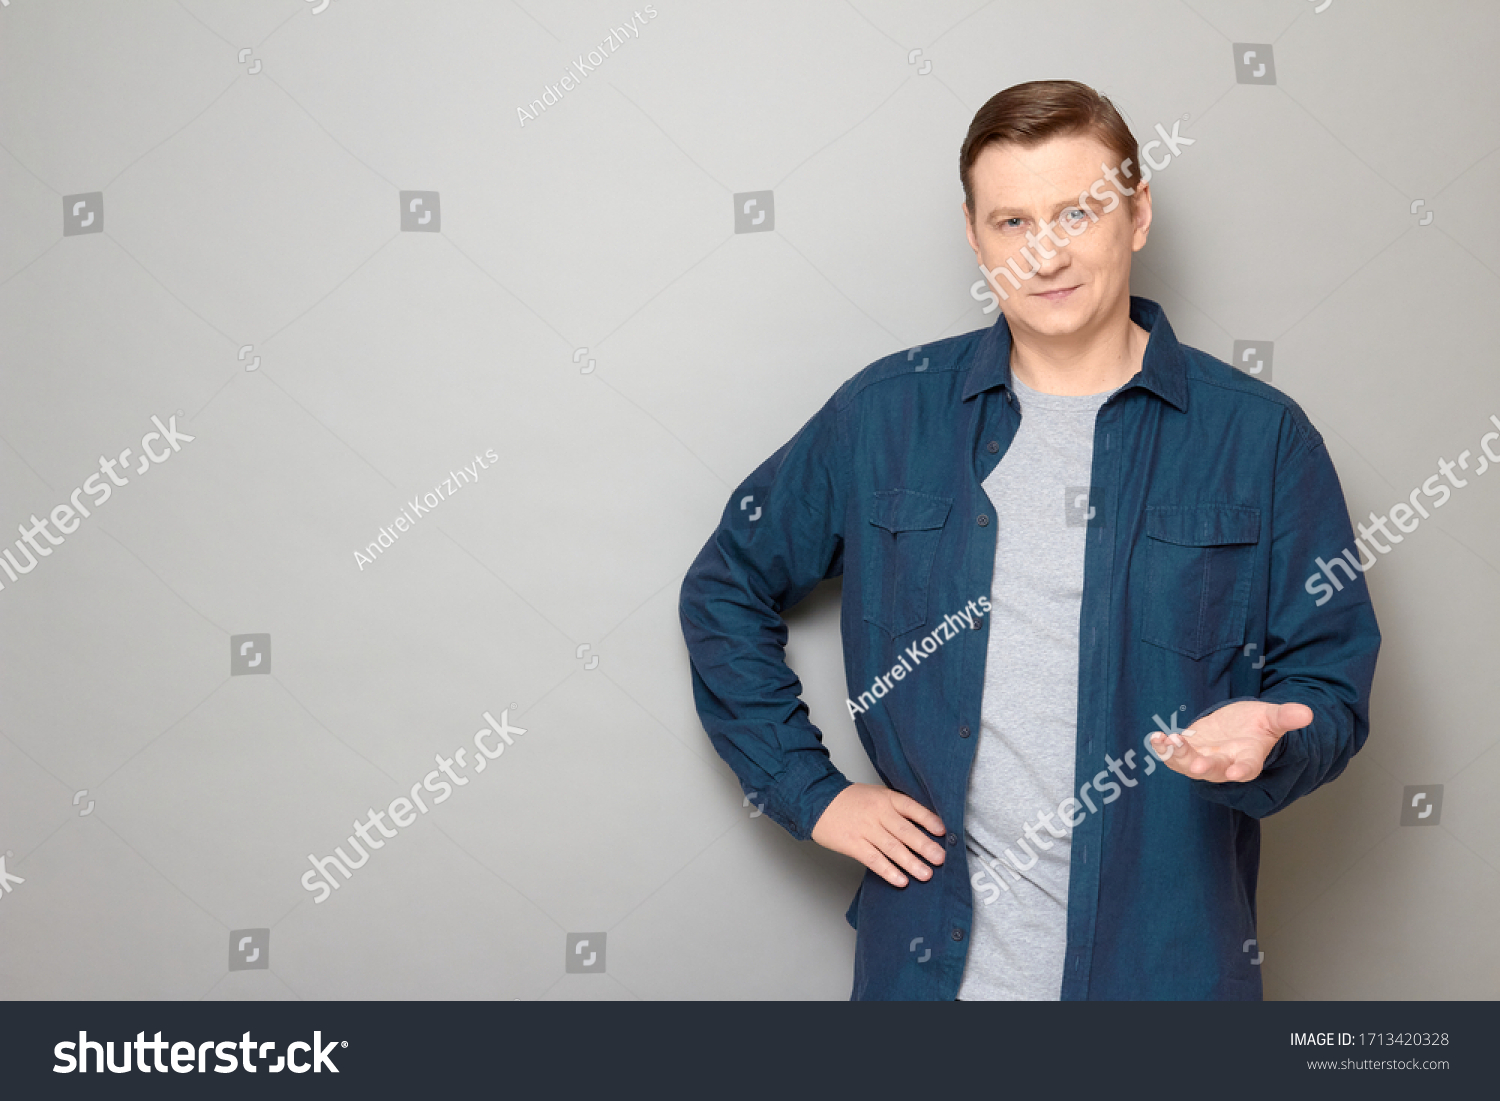 Studio portrait of friendly man wearing blue shirt, smiling, stretching one hand like offering product, asking your opinion or waiting your decision, standing over gray background, copy space on left #1713420328